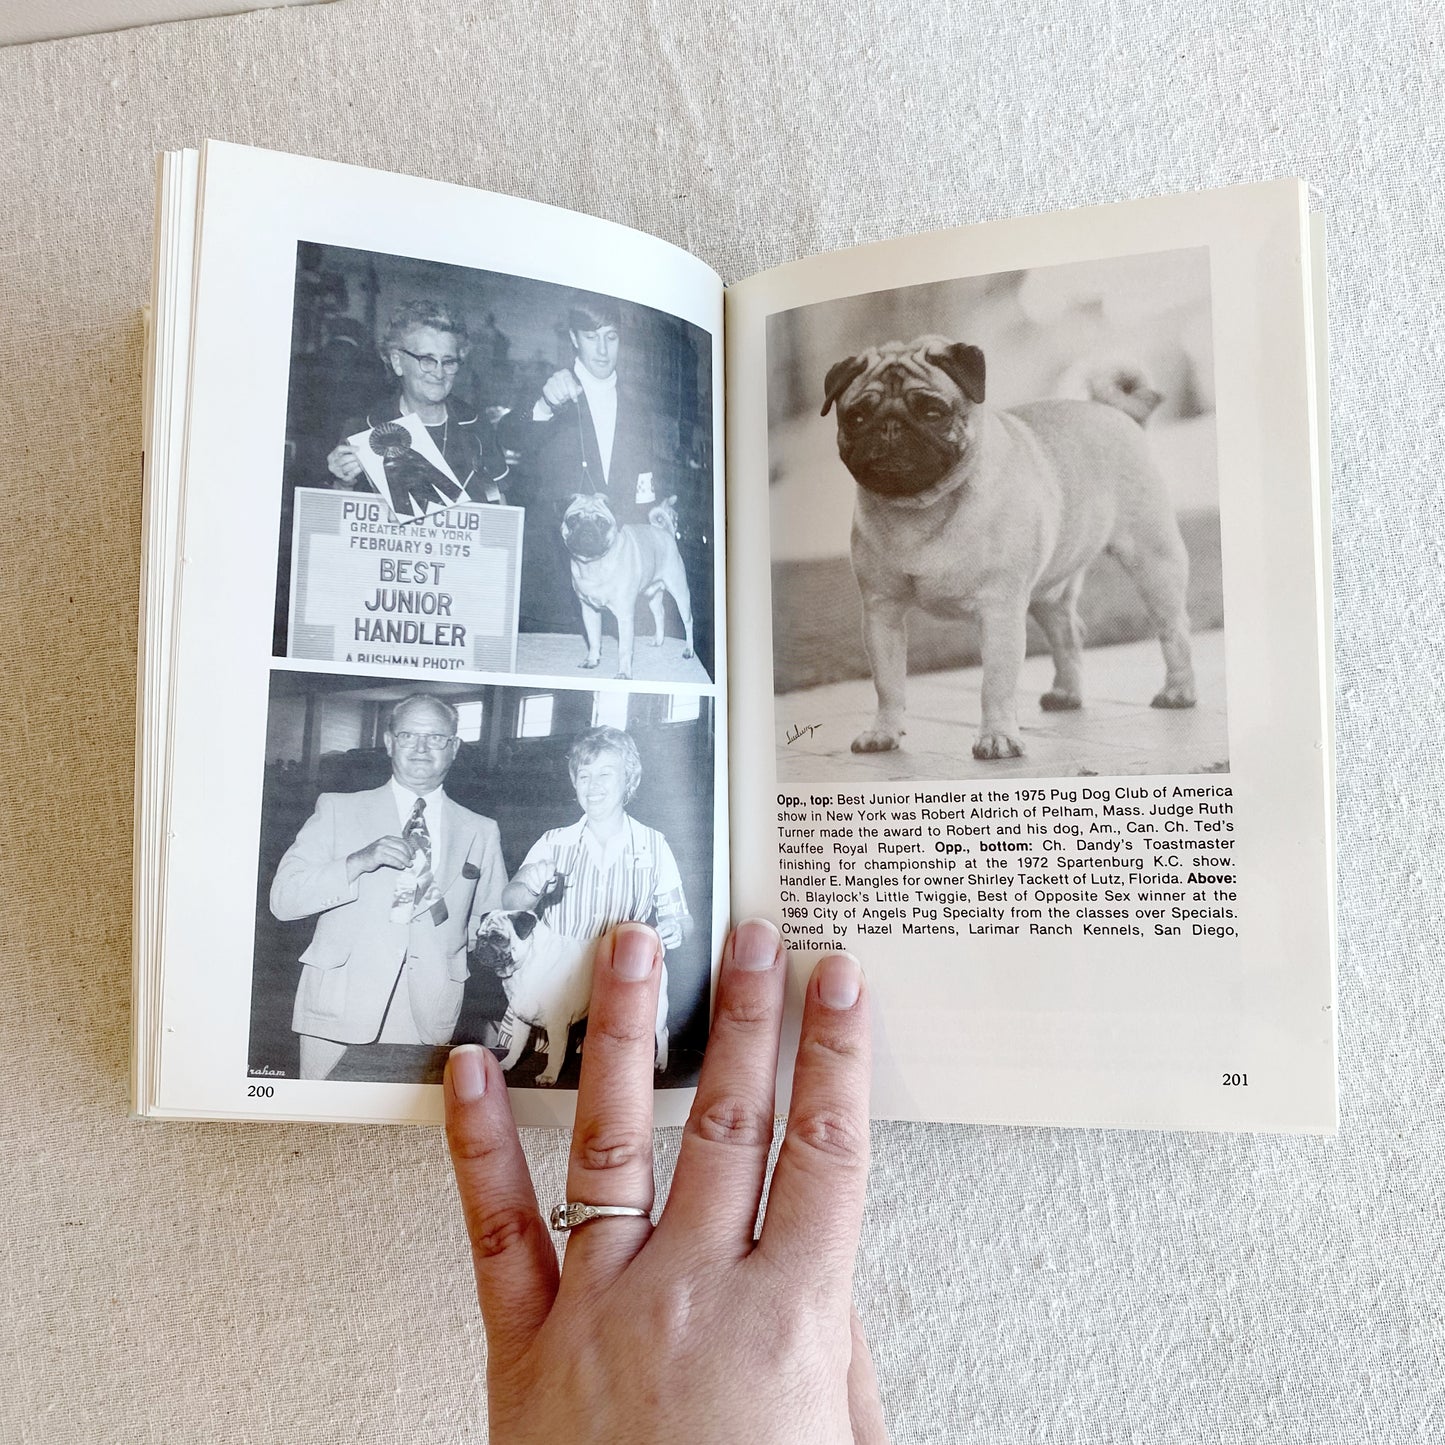 Book: The Book of Pugs